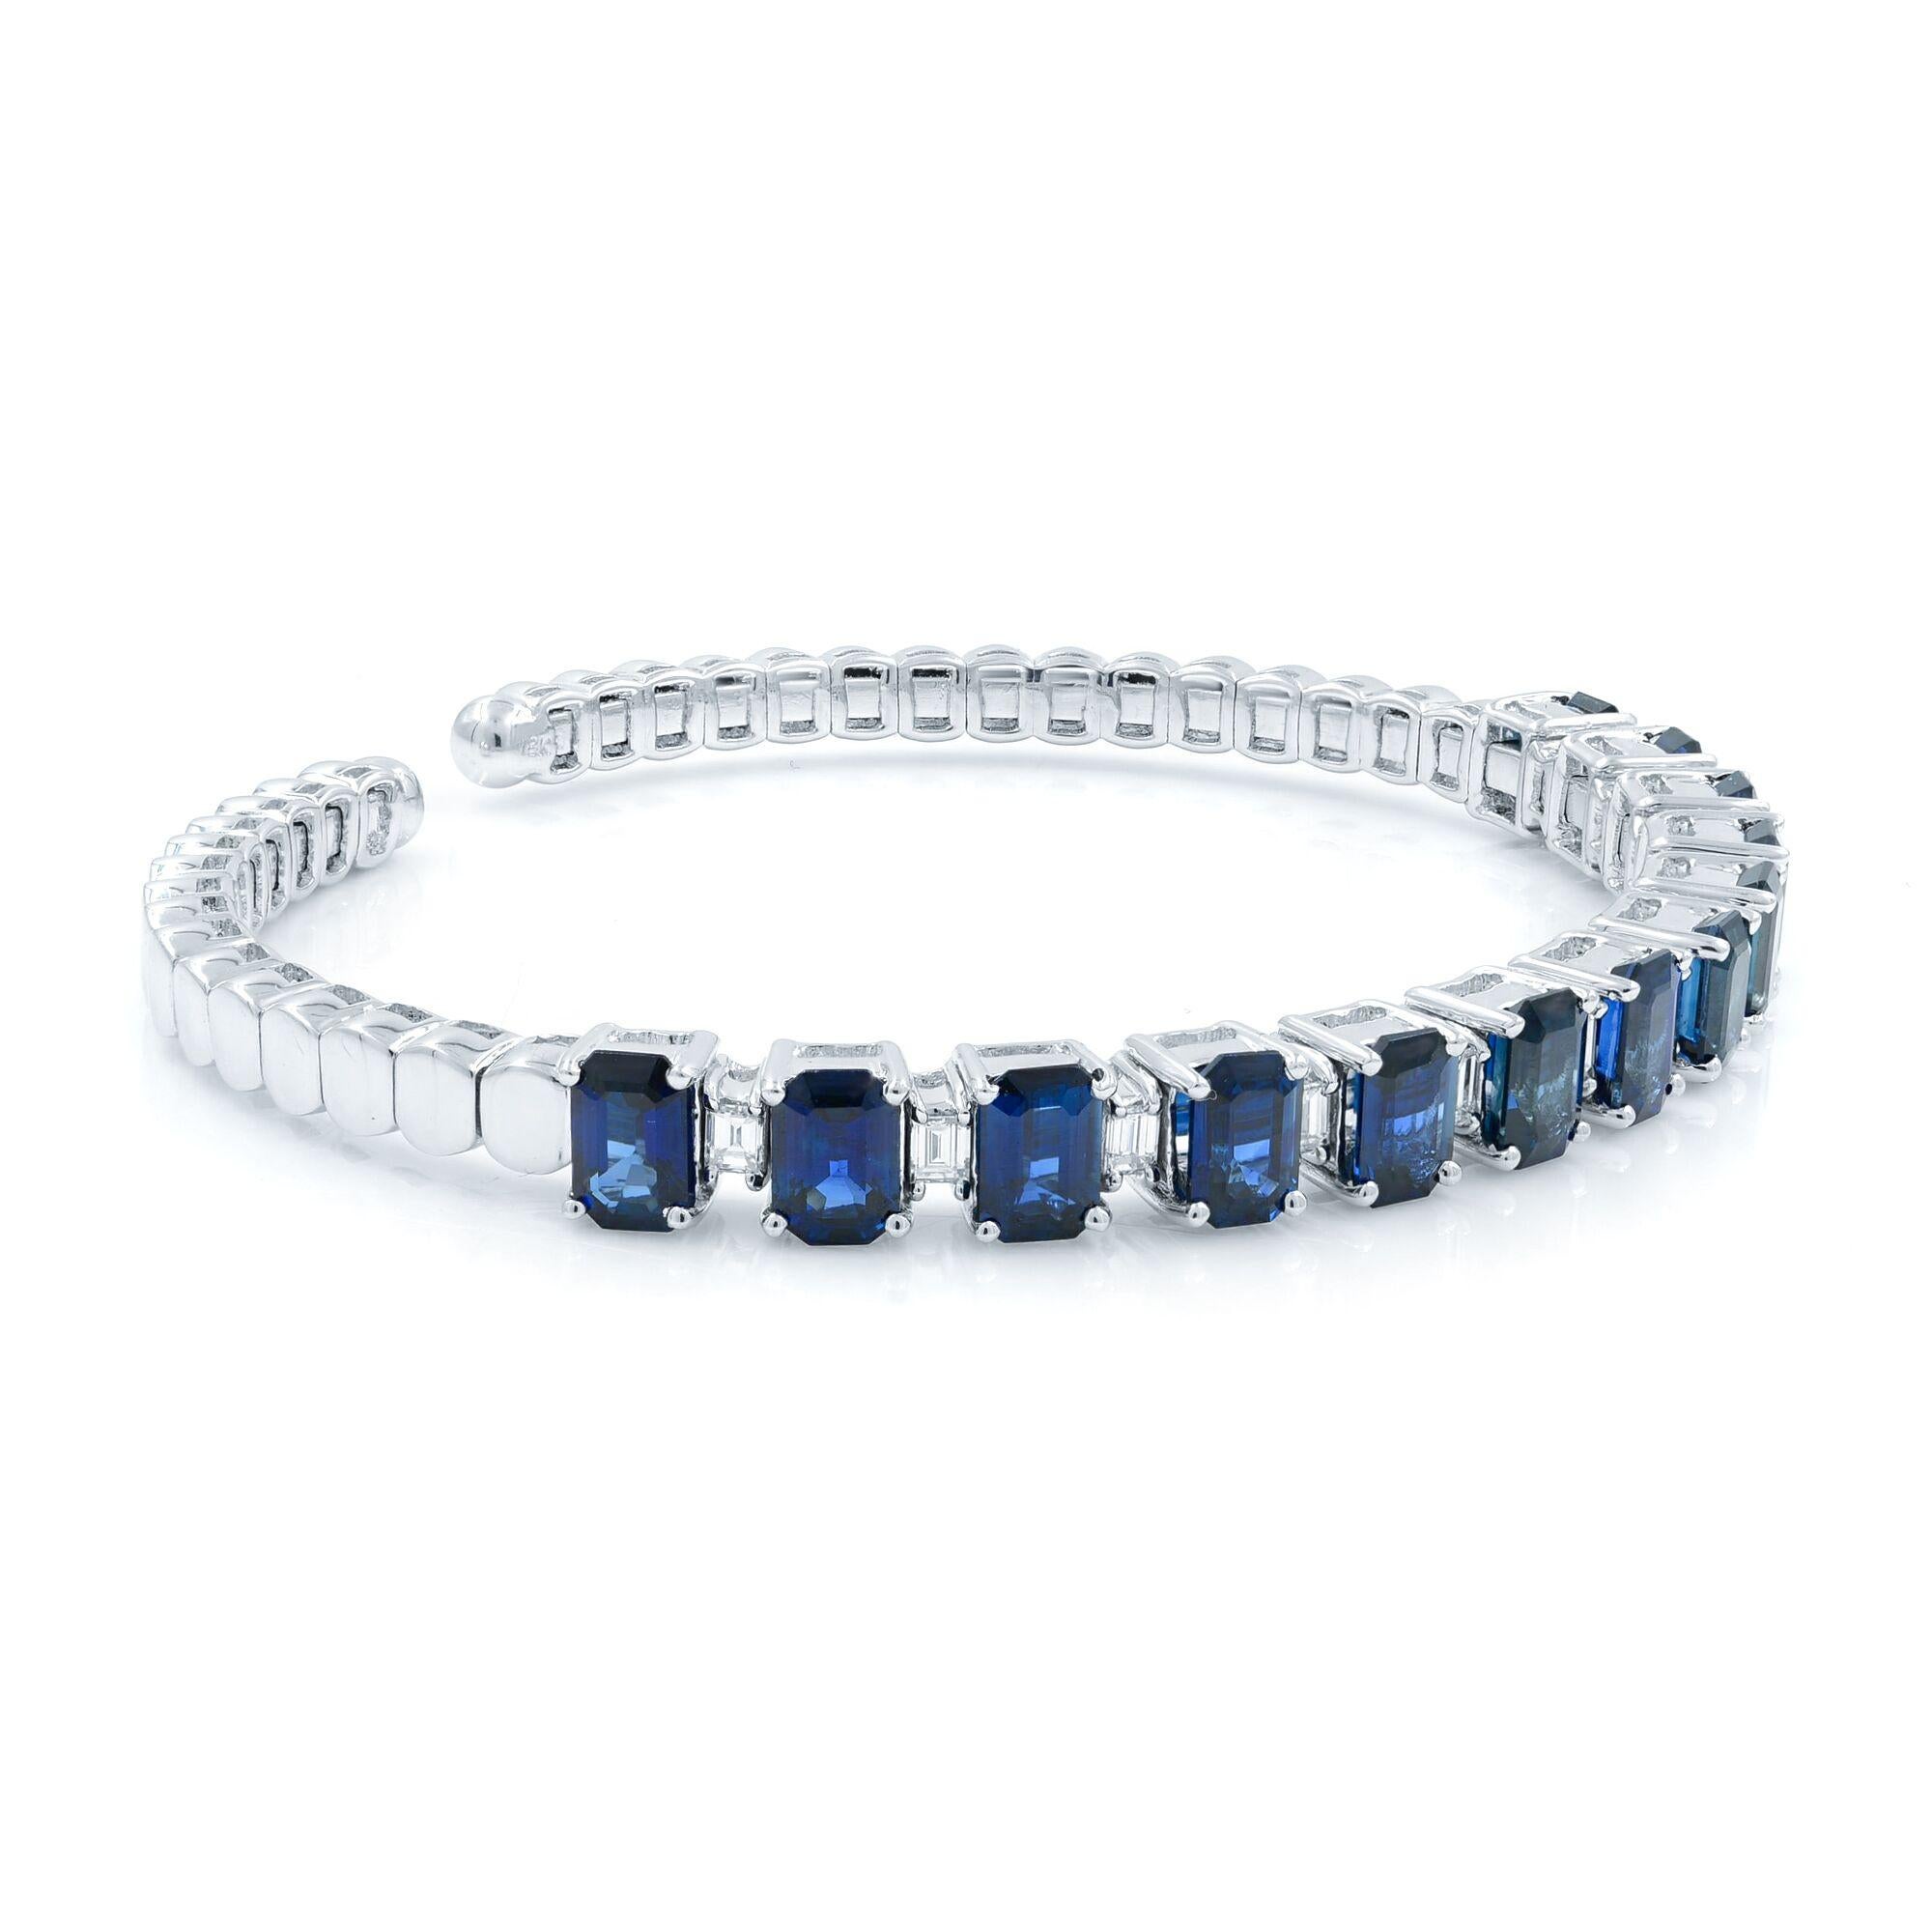 Blue Sapphire 10.20Cttw And Diamond 1.20Cttw Bangle Bracelet 18K White Gold  In New Condition For Sale In New York, NY